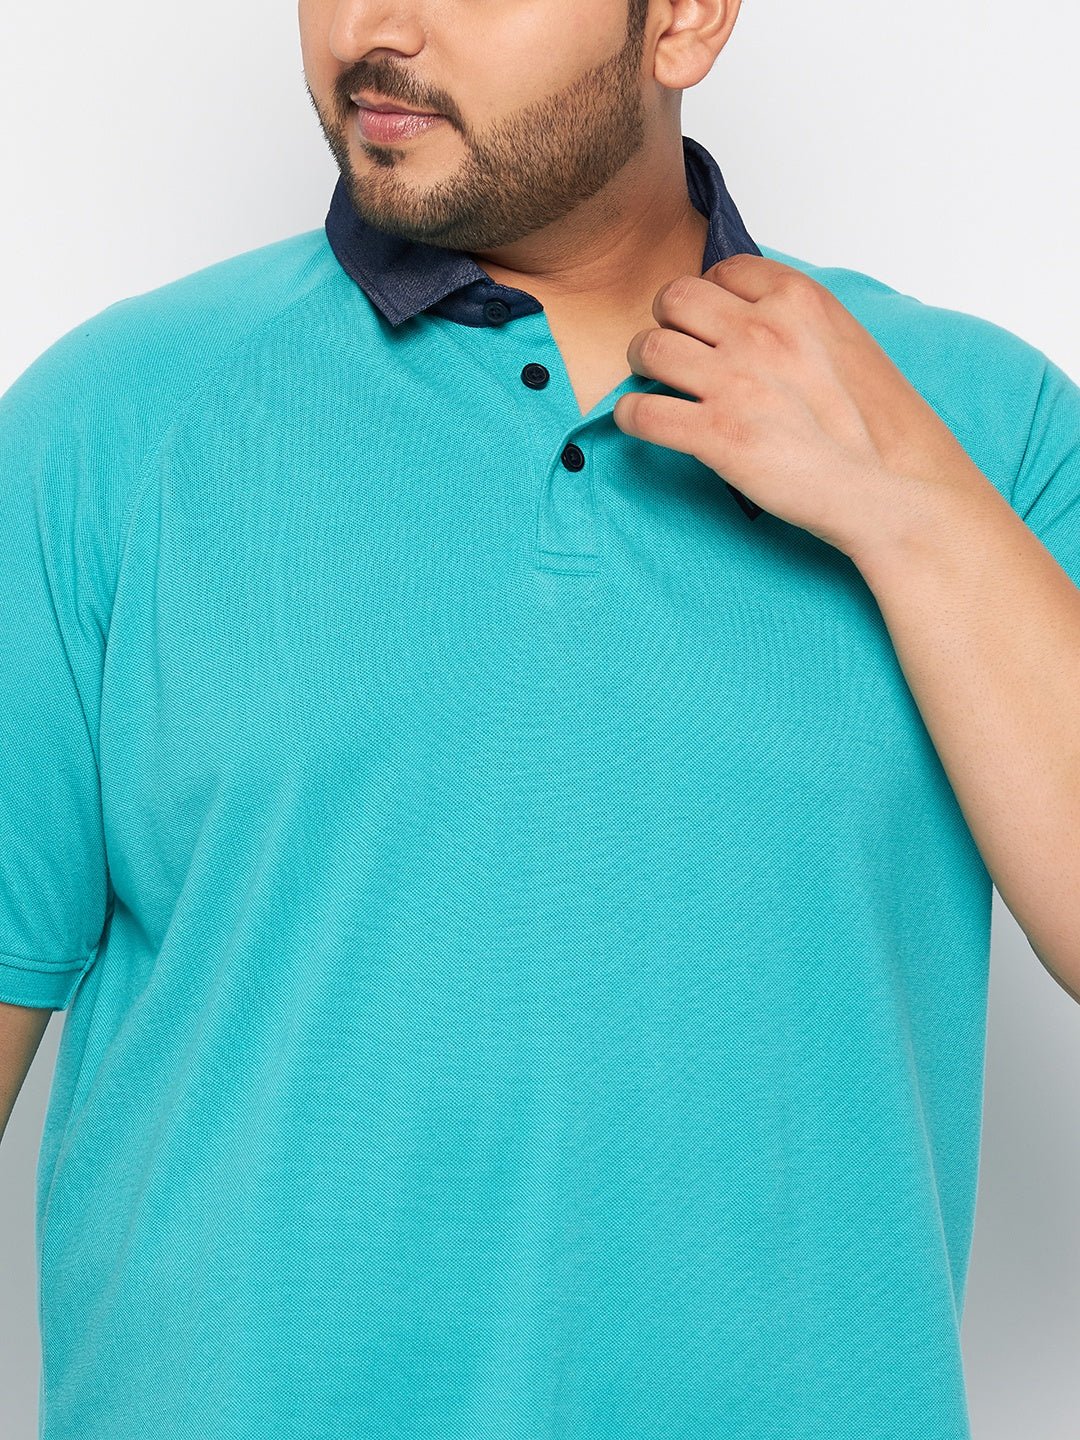 Plus Size Turquoise Blue Polo T-Shirt - clubyork